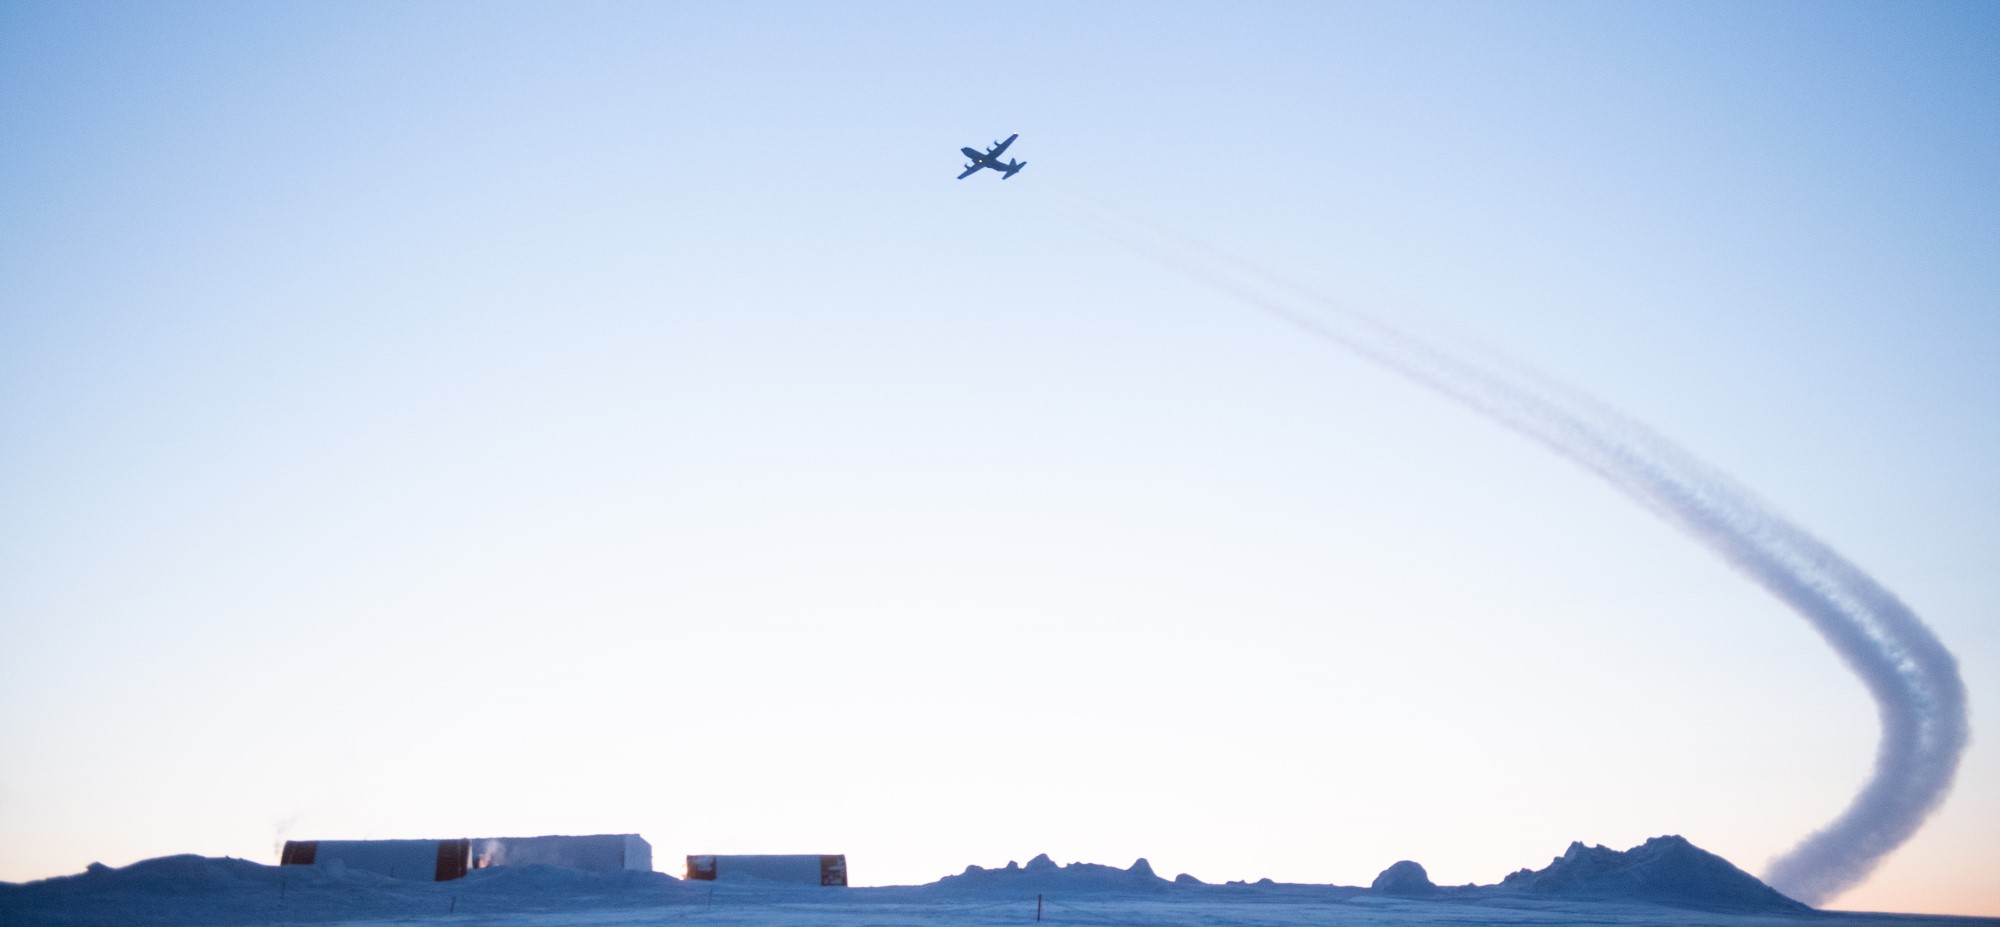 In a photo that shows an Arctic landscape, a big propeller aircraft flies in a blue sky leaving a vapour trail behind it.